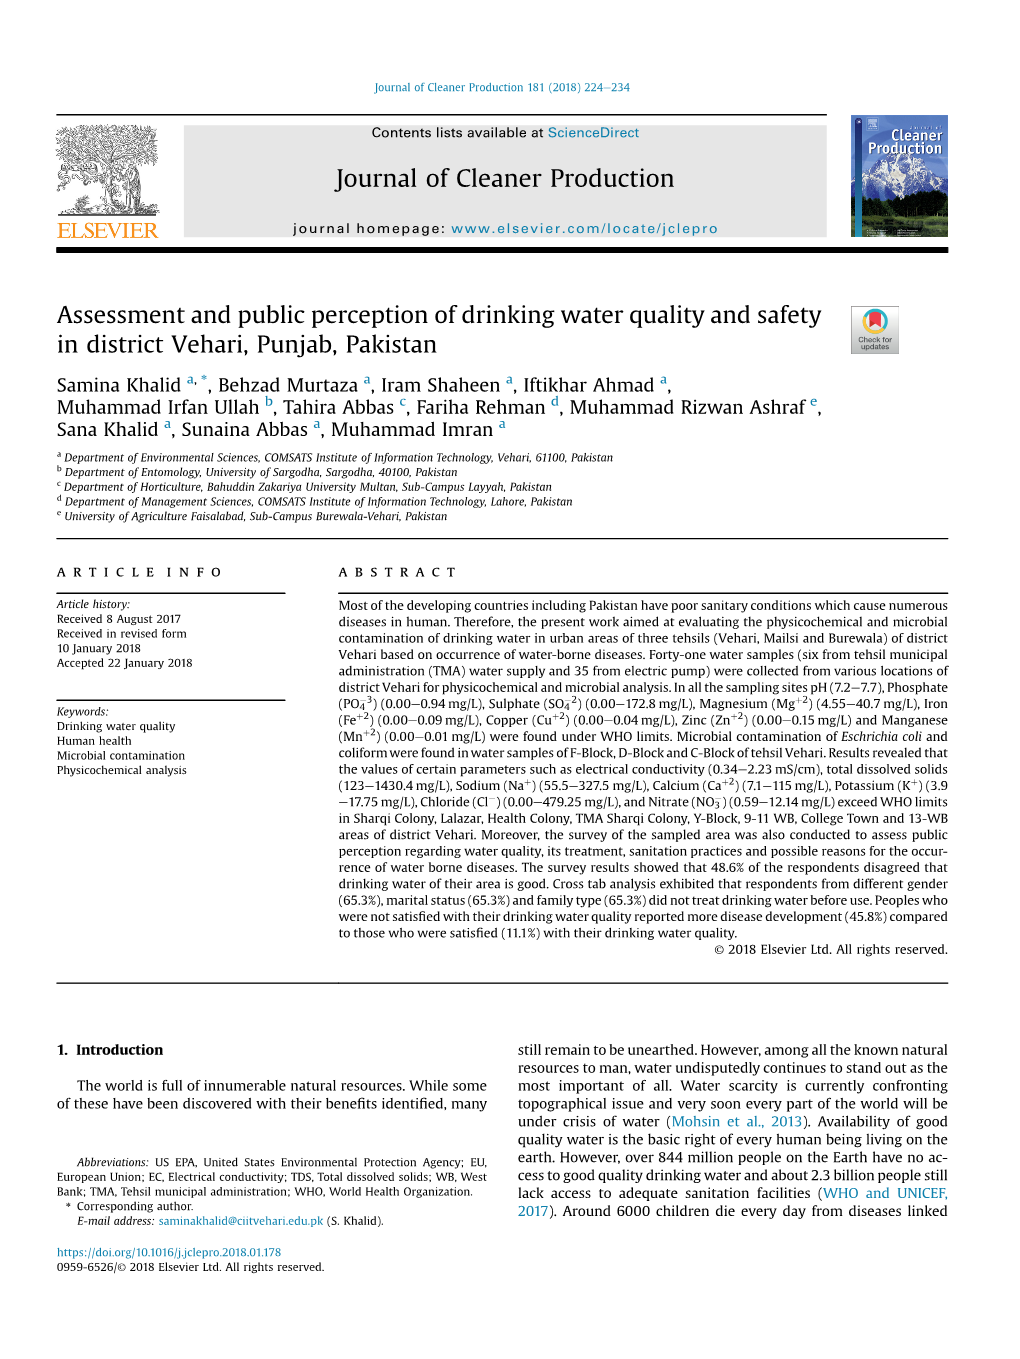 Assessment and Public Perception of Drinking Water Quality and Safety in District Vehari, Punjab, Pakistan